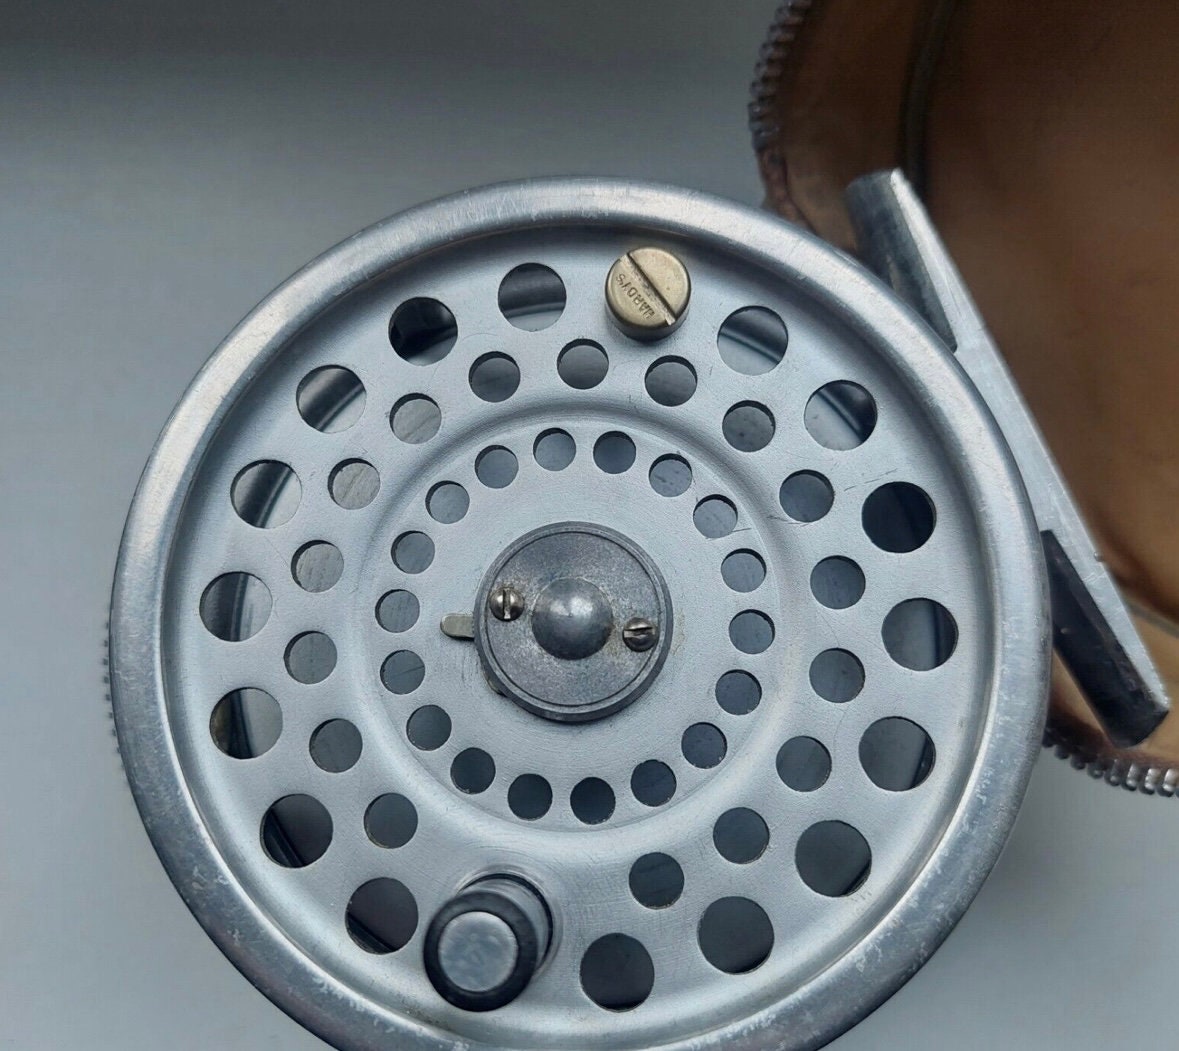 shop offers HOUSE OF HARDY MARQUIS 6 FLY REEL